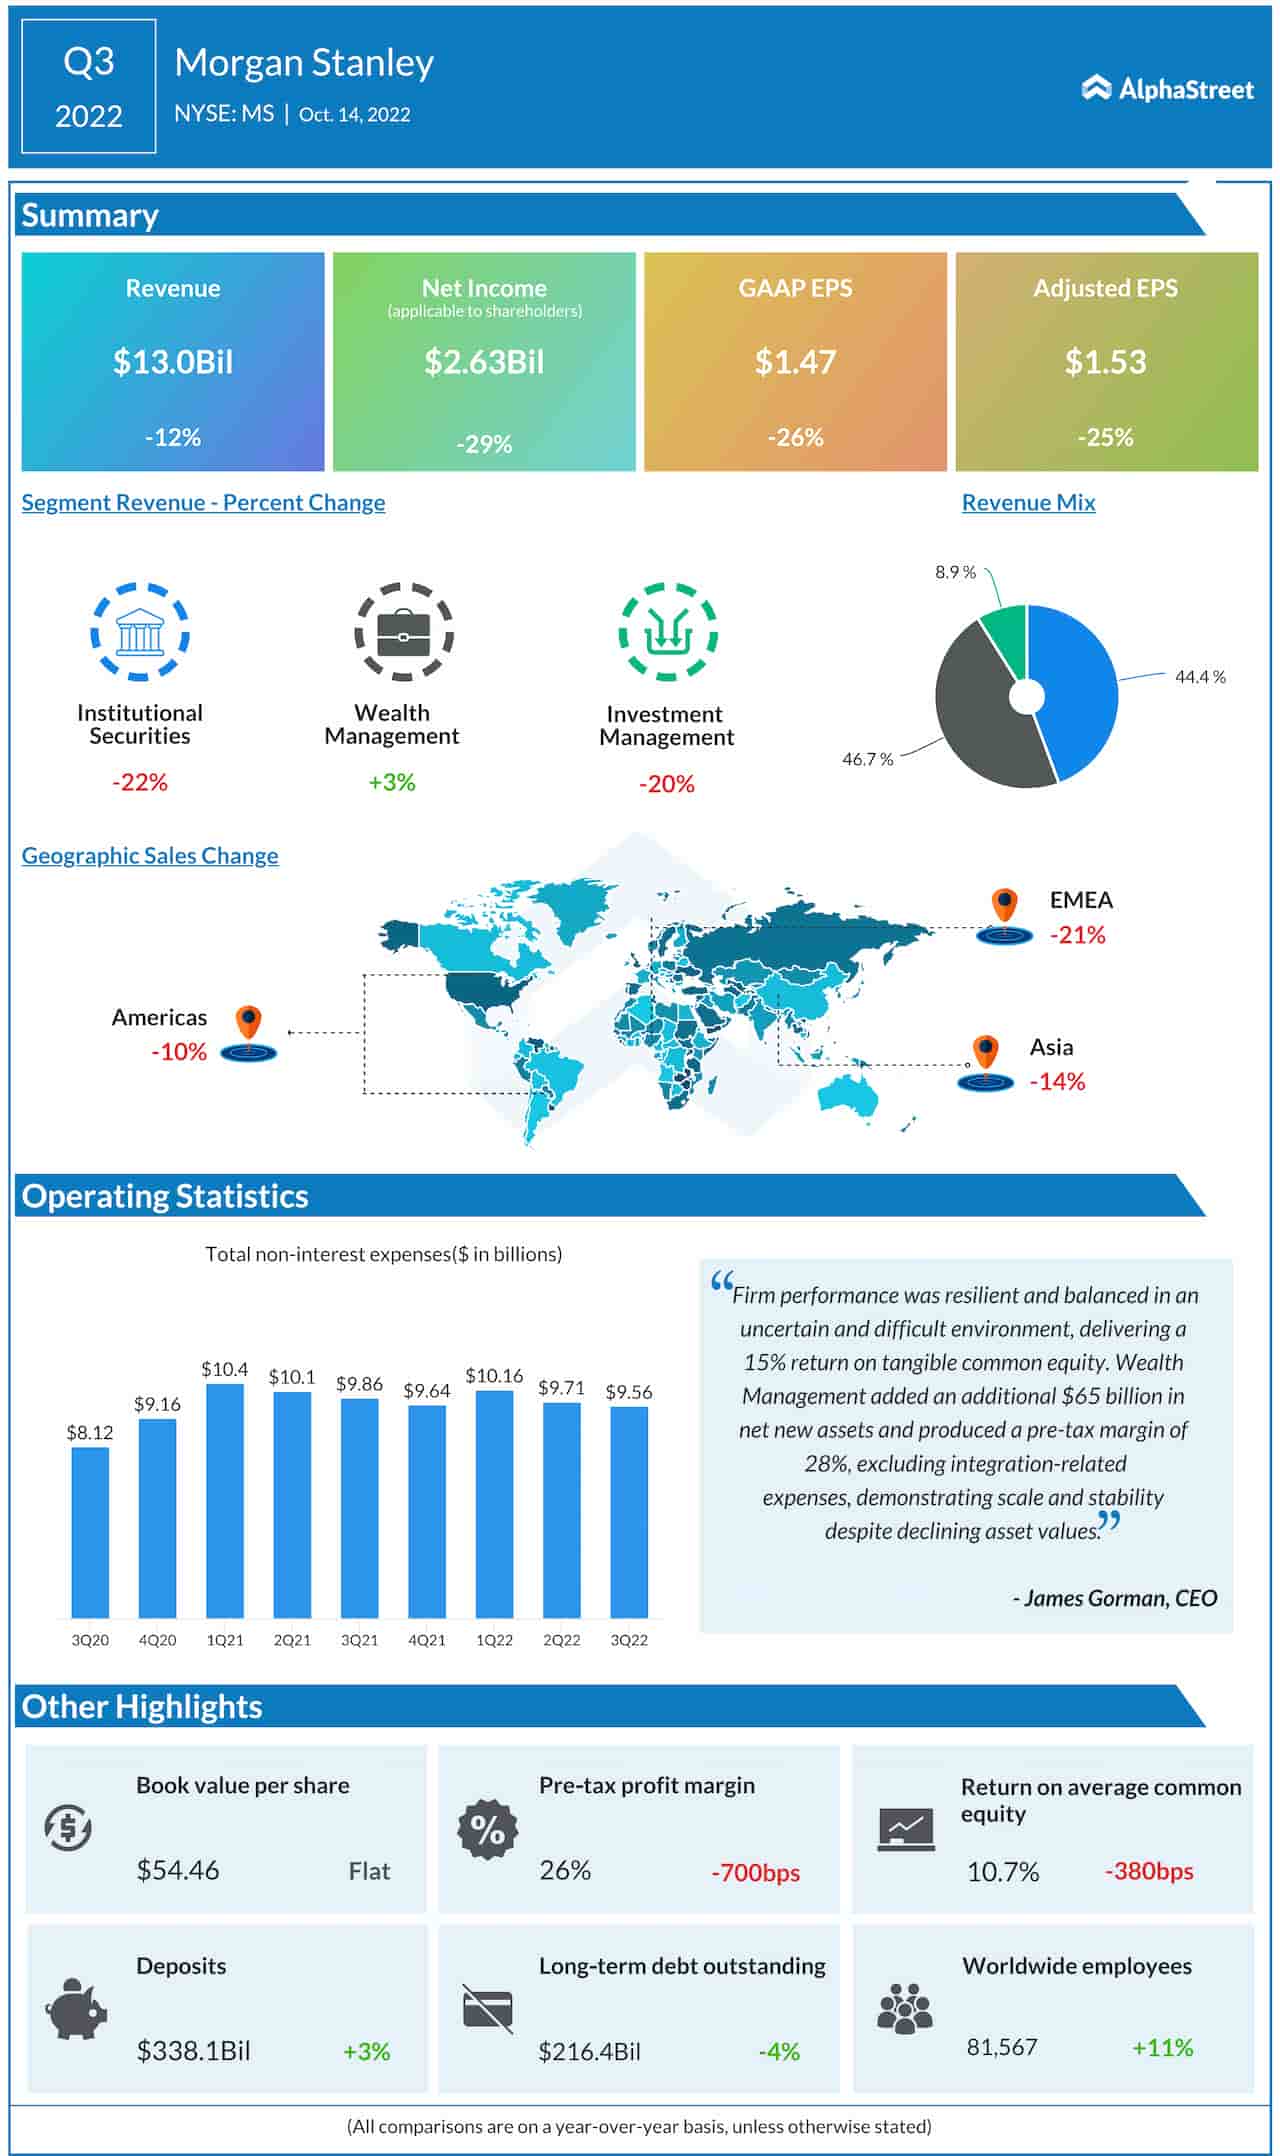 Infographic: Highlights of Morgan Stanley (MS) Q3 2022 earnings report